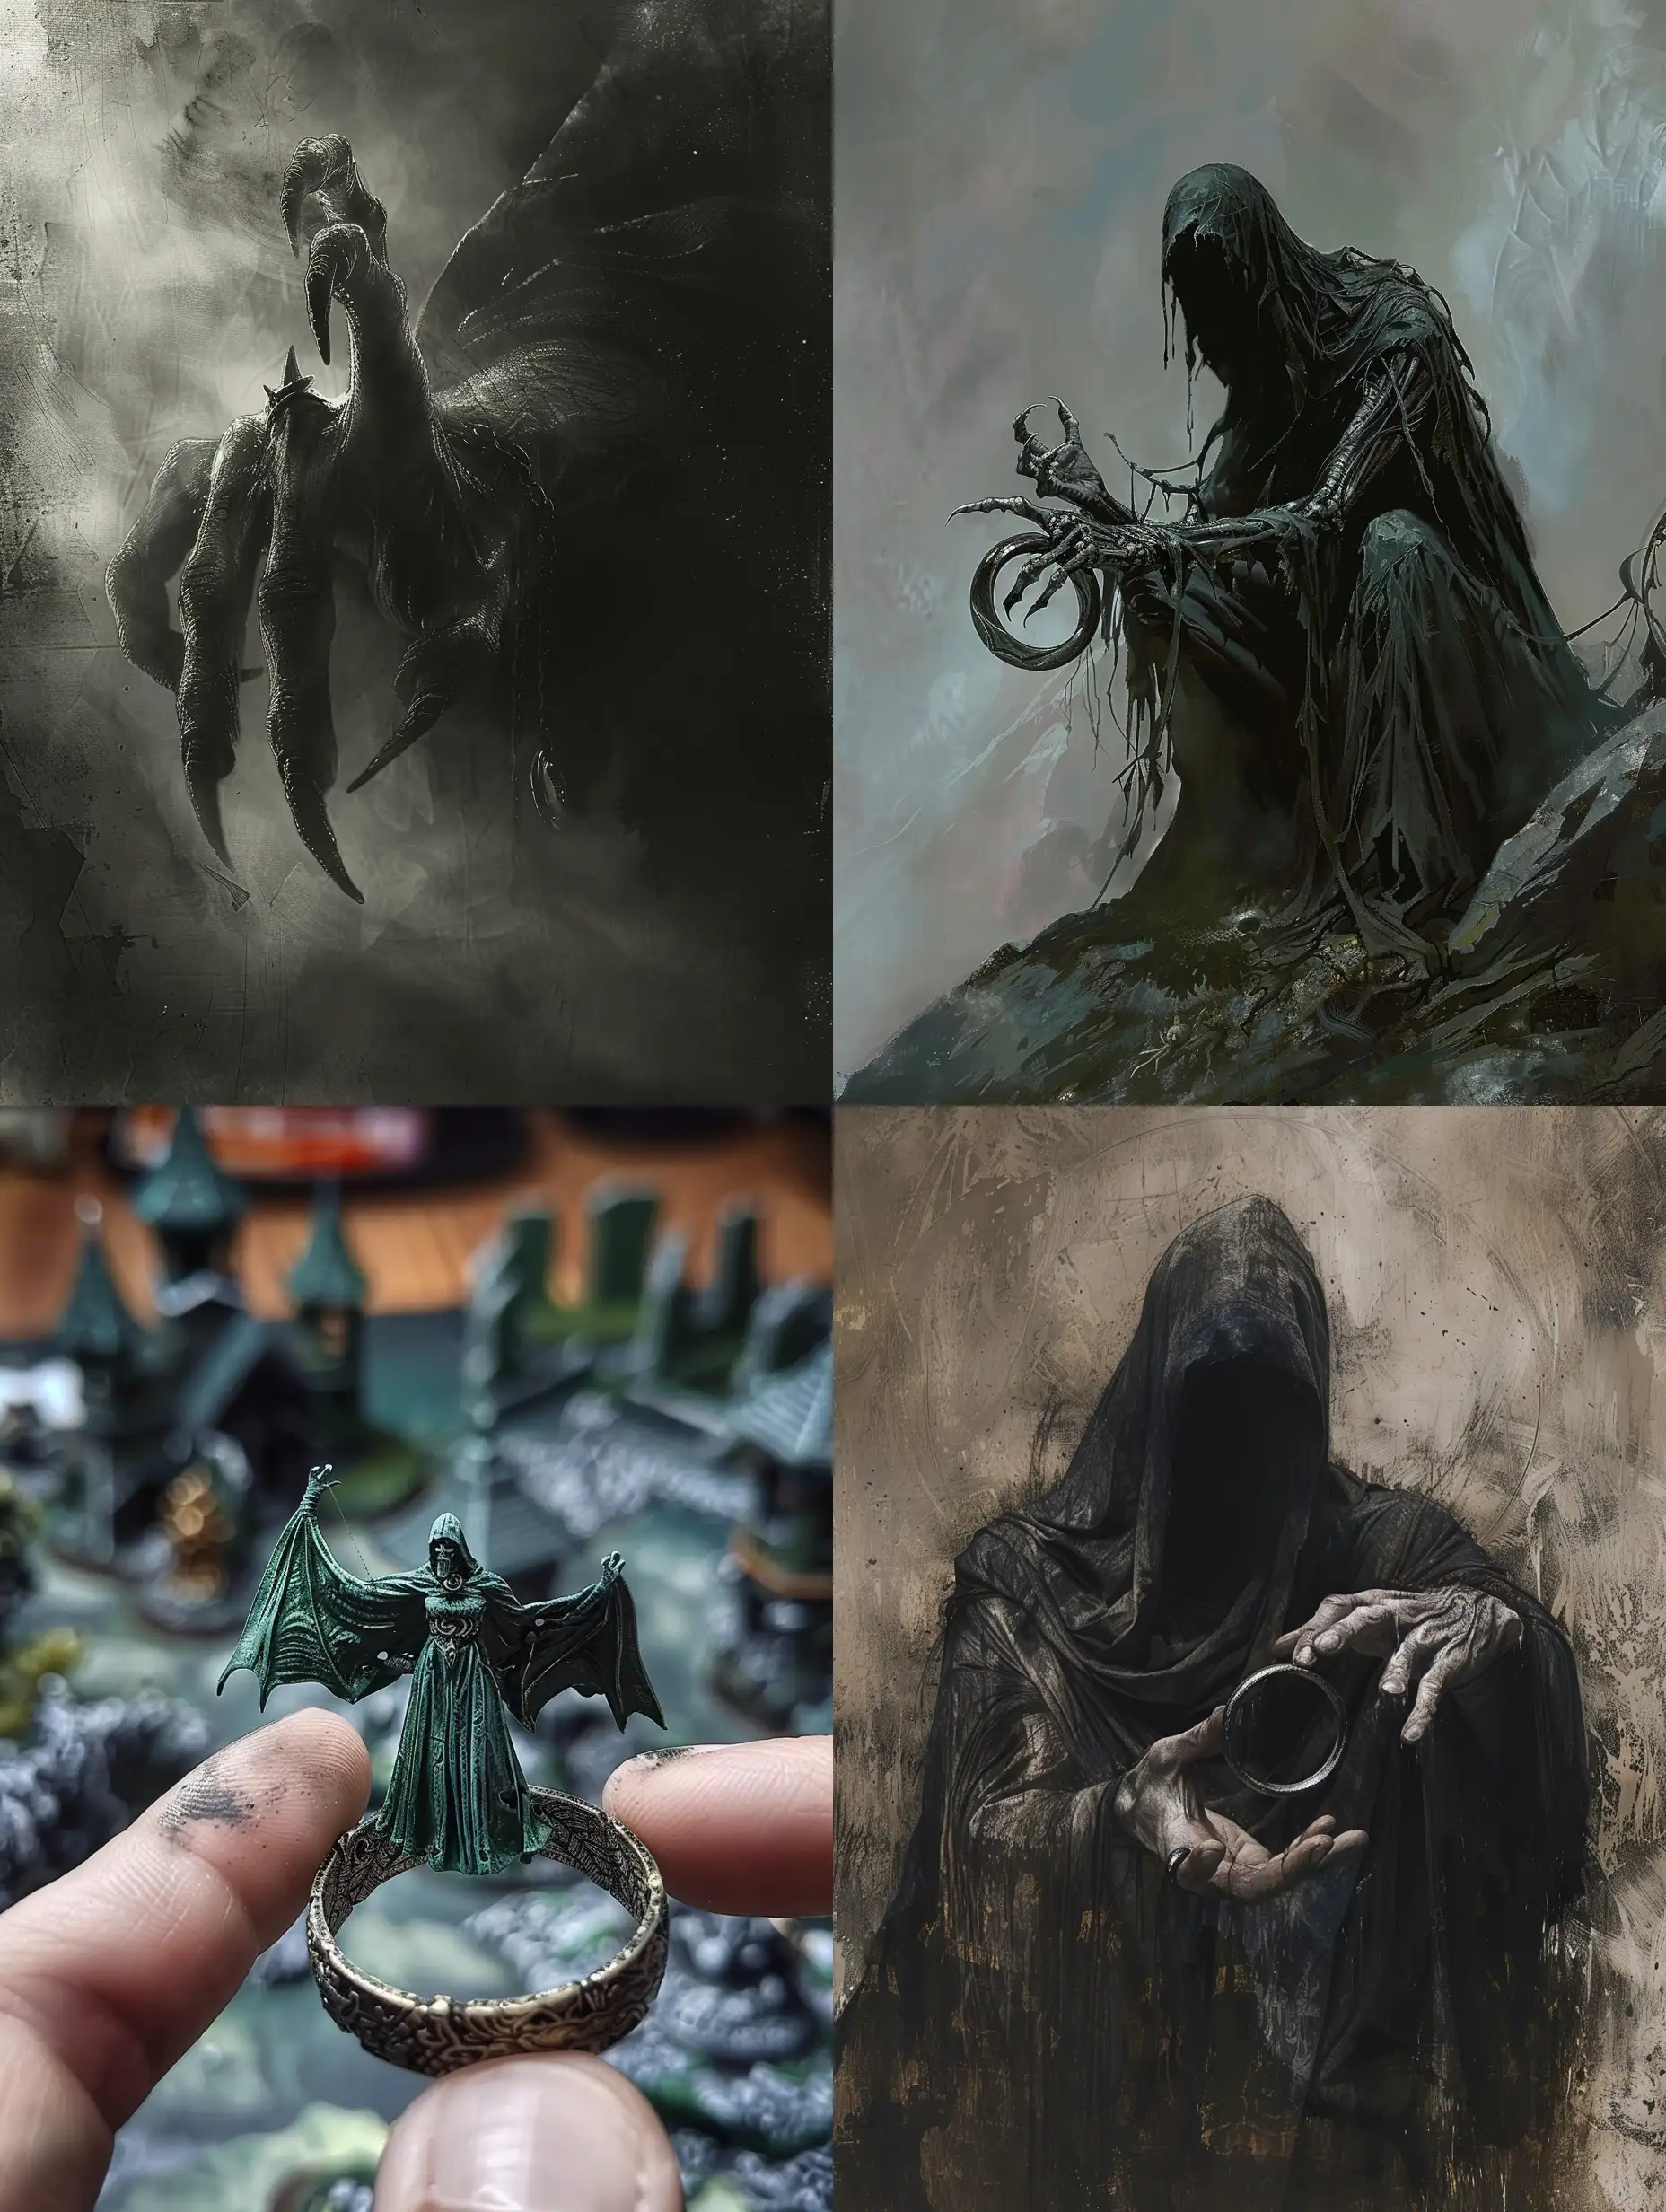 Nazgul-Reaching-for-the-Ring-in-Dark-Ambiance